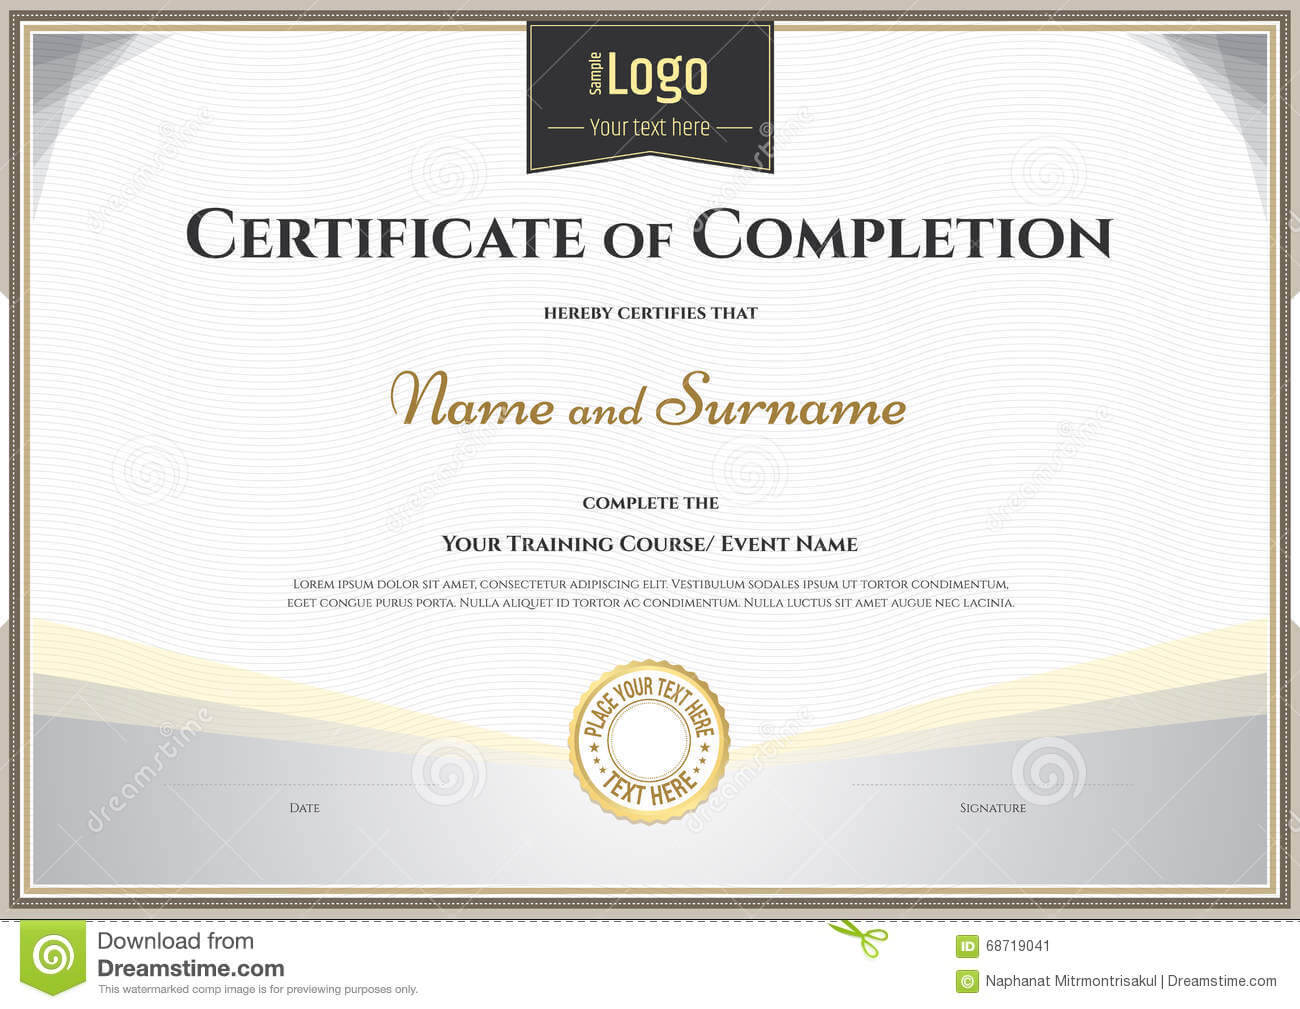 Certificate Of Completion Template In Vector For Achievement With Regard To Blank Certificate Of Achievement Template